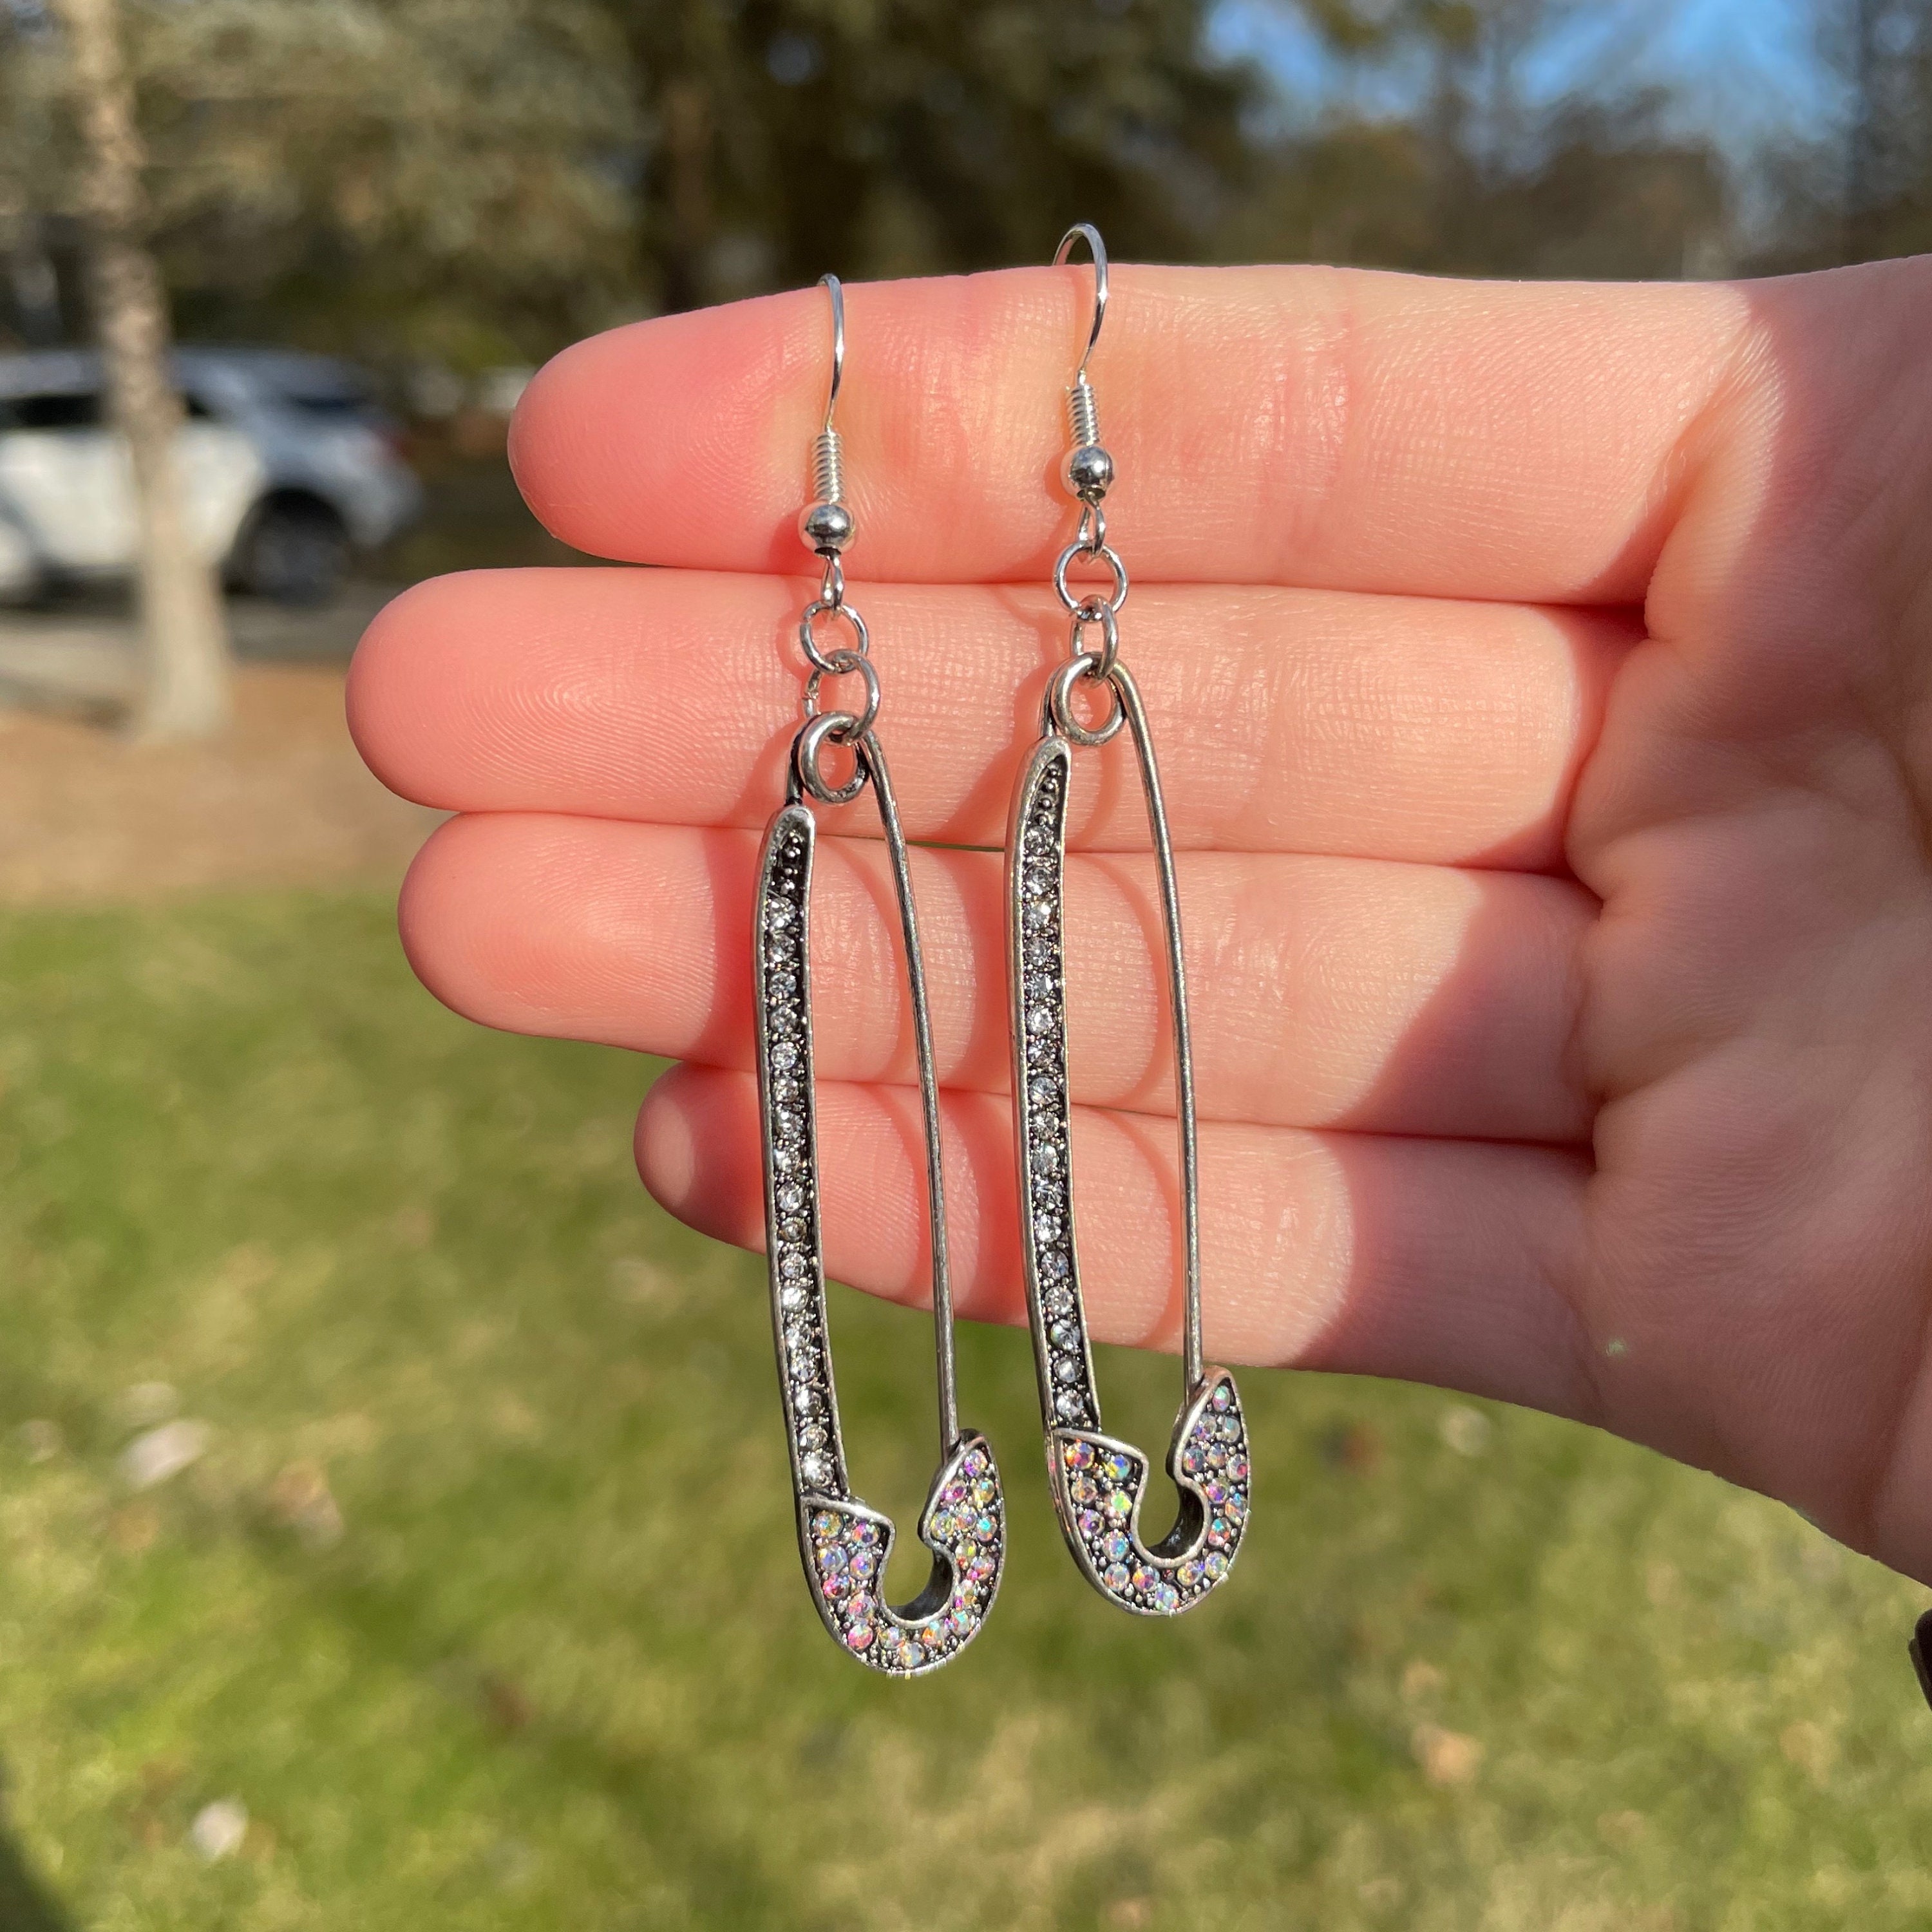 Silver and Crystal Safety Pin Dangle Earrings | Novelty Earrings | Unique  Earrings | Fun Earrings | Pretty Earrings